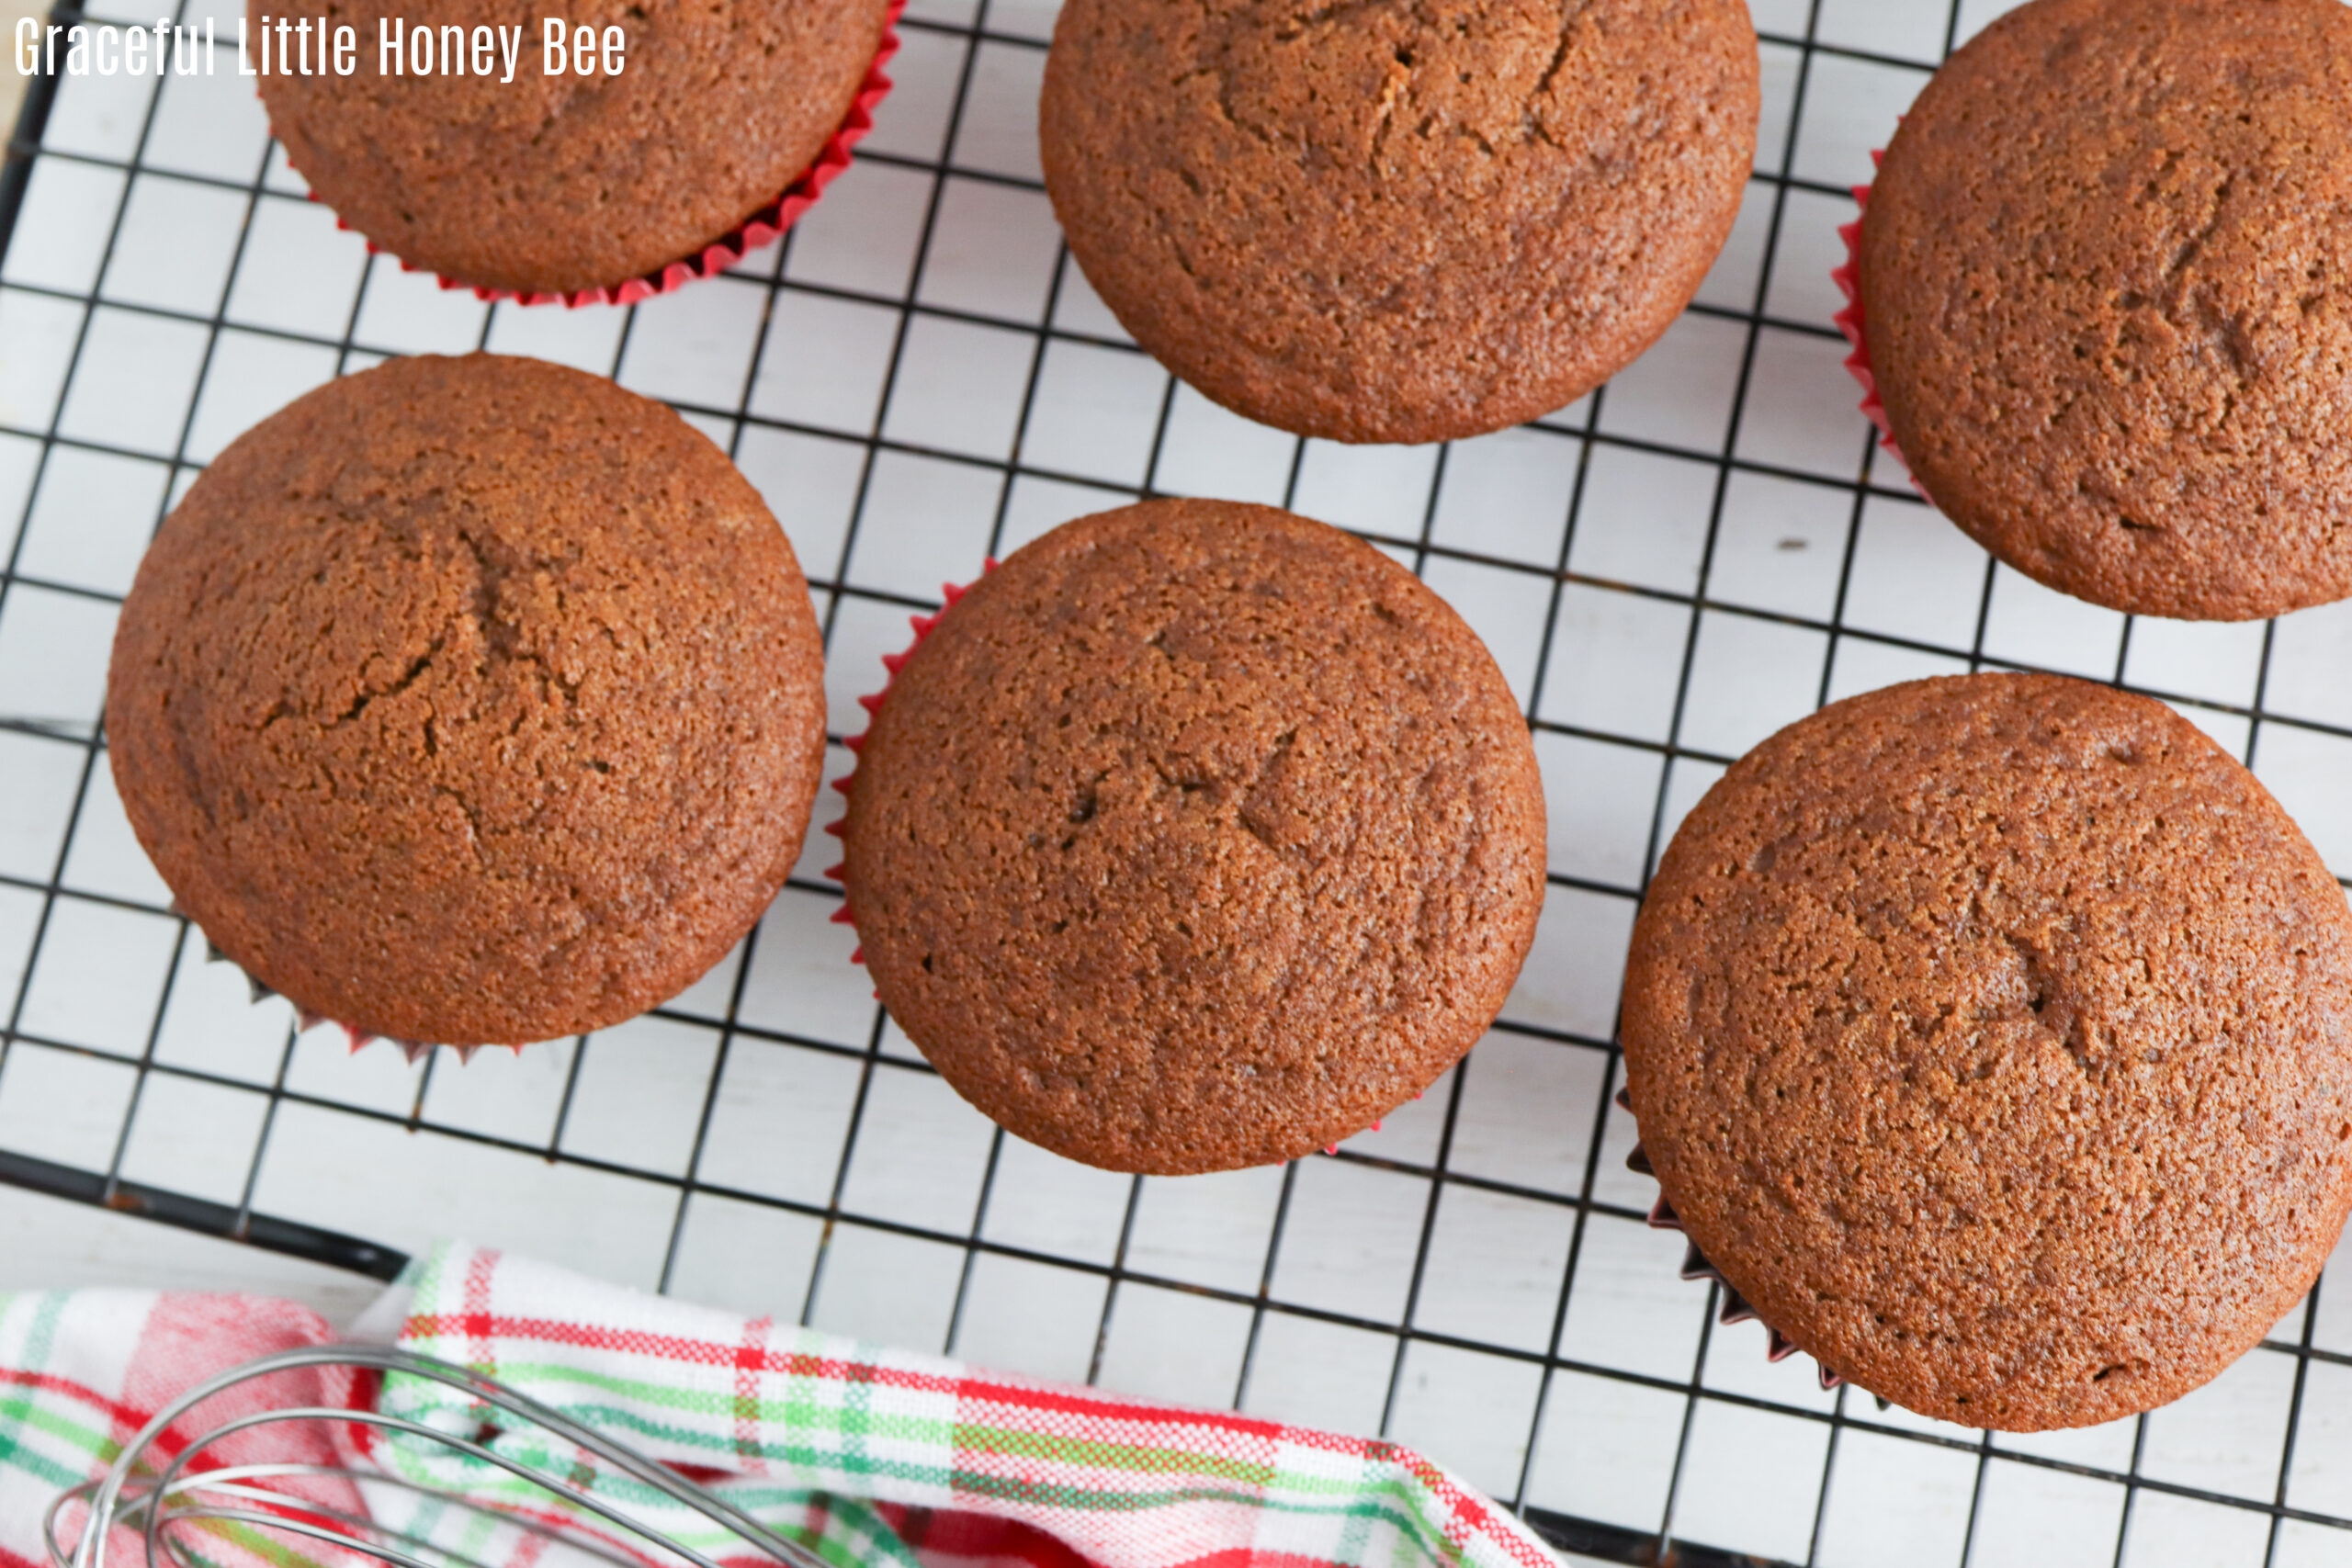 Gingerbread muffins sitting on a black wire cooling rack.